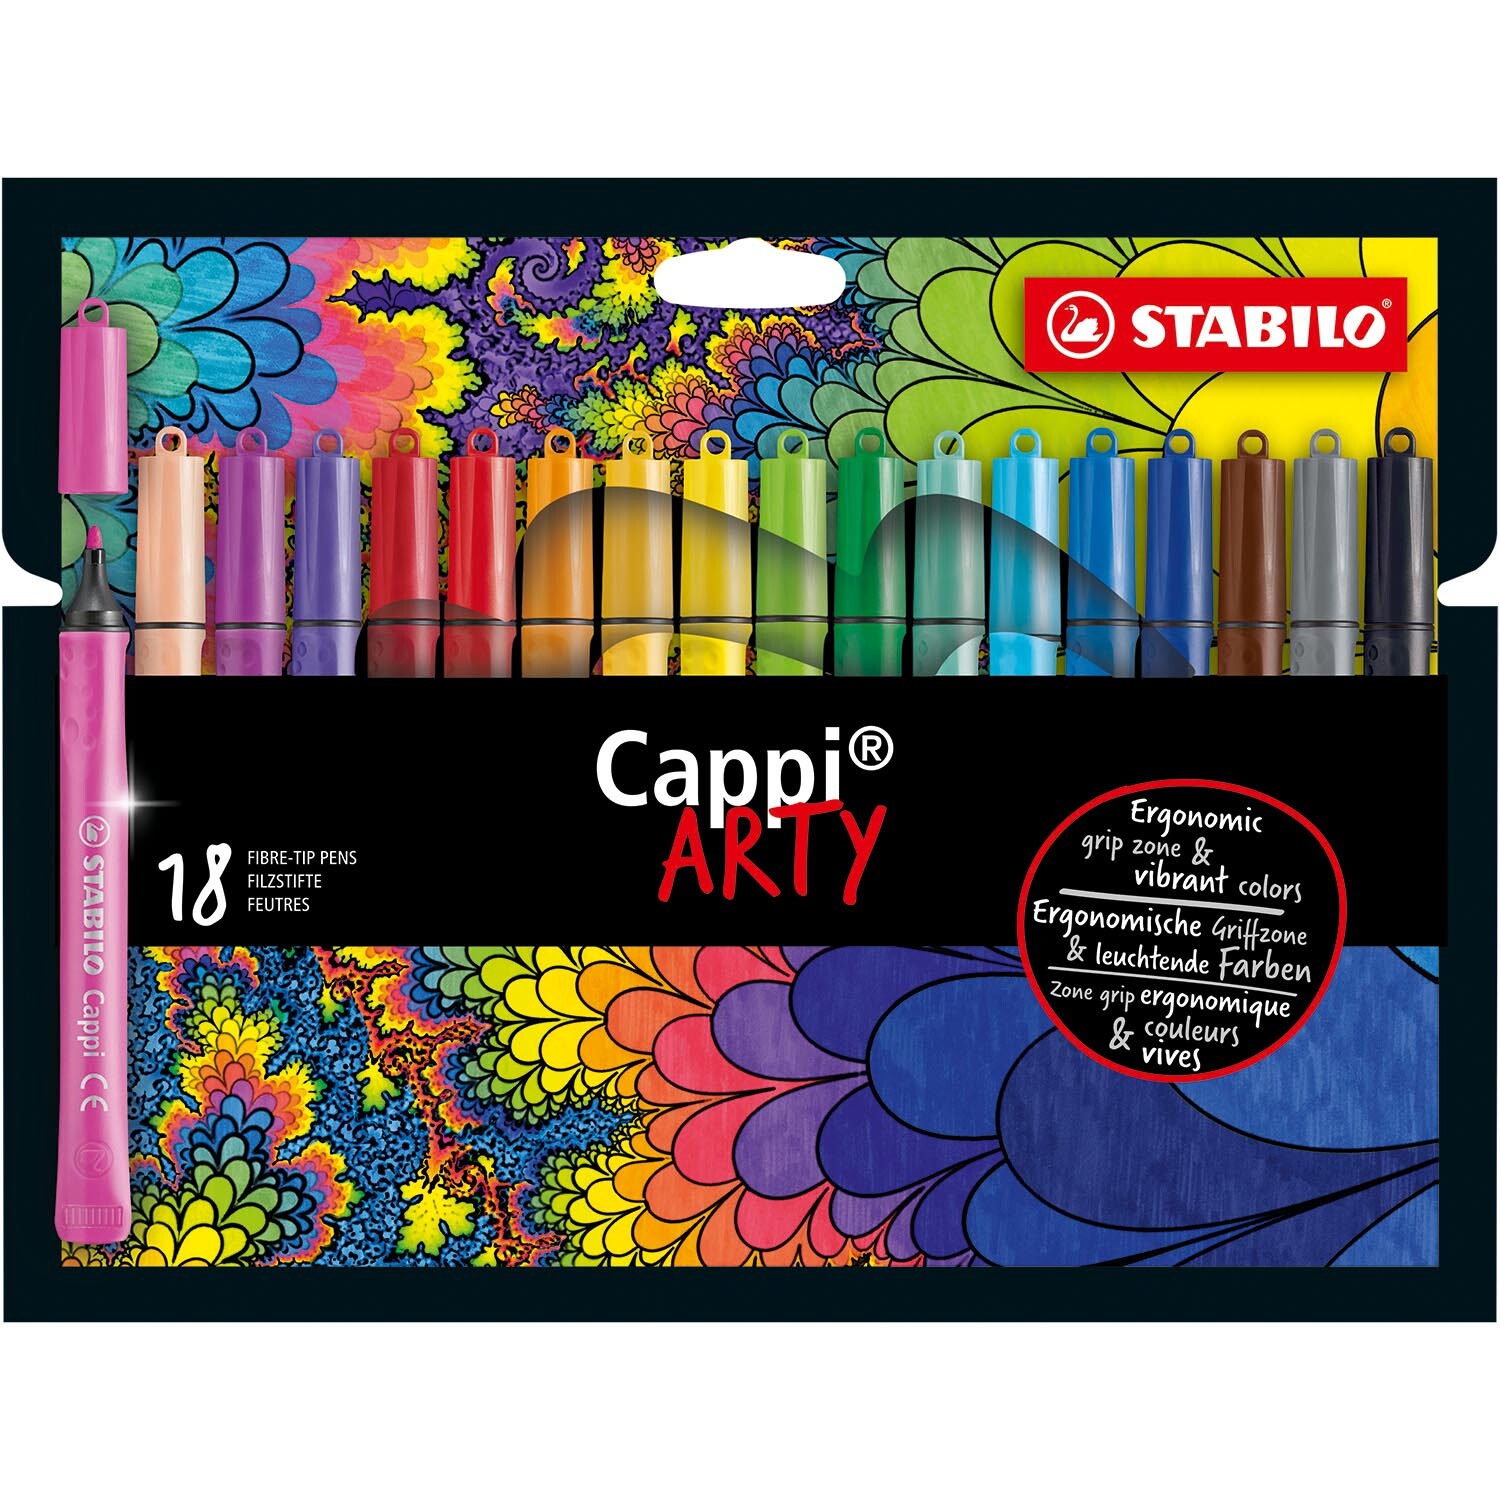 Stabilo Cappi Arty Colouring Pens 18 Pack Image